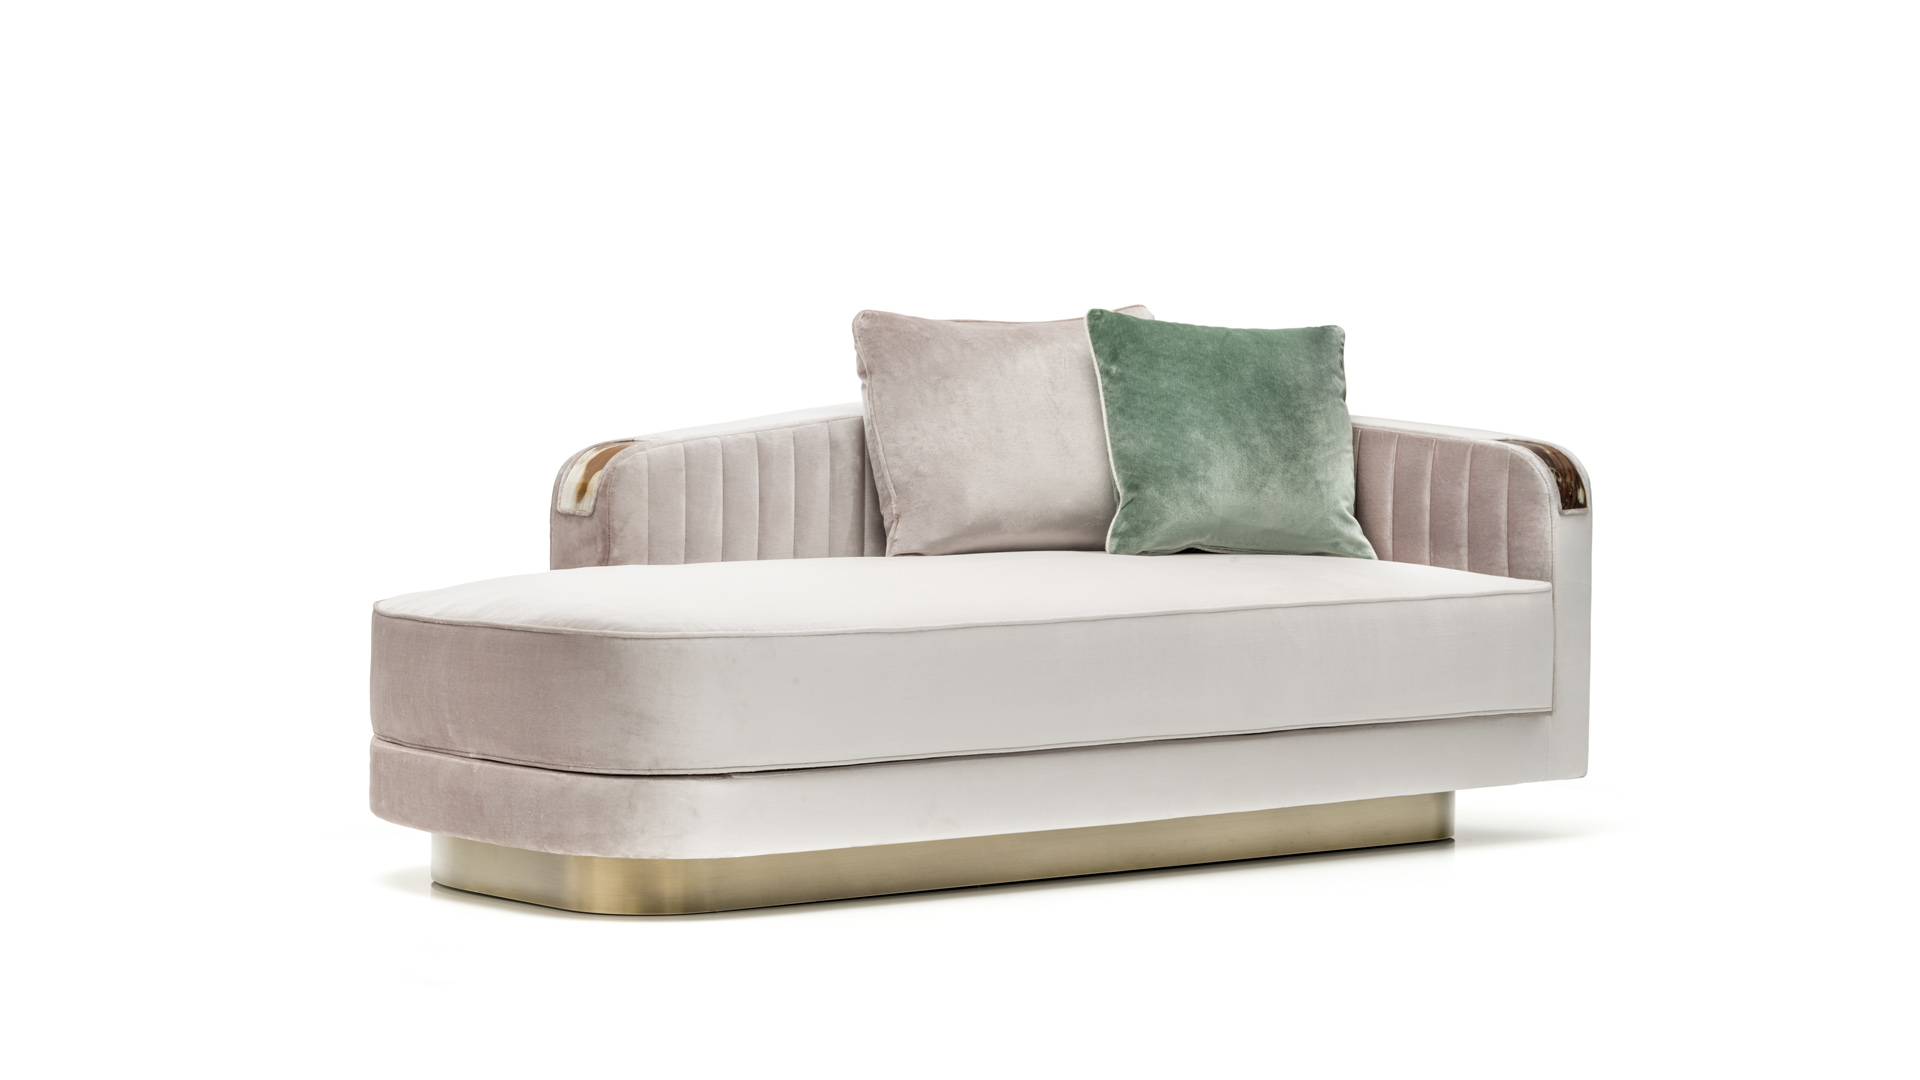 Sofas and seats - Rea chaise longue in Splendido velvet with horn armrests - cover - Arcahorn